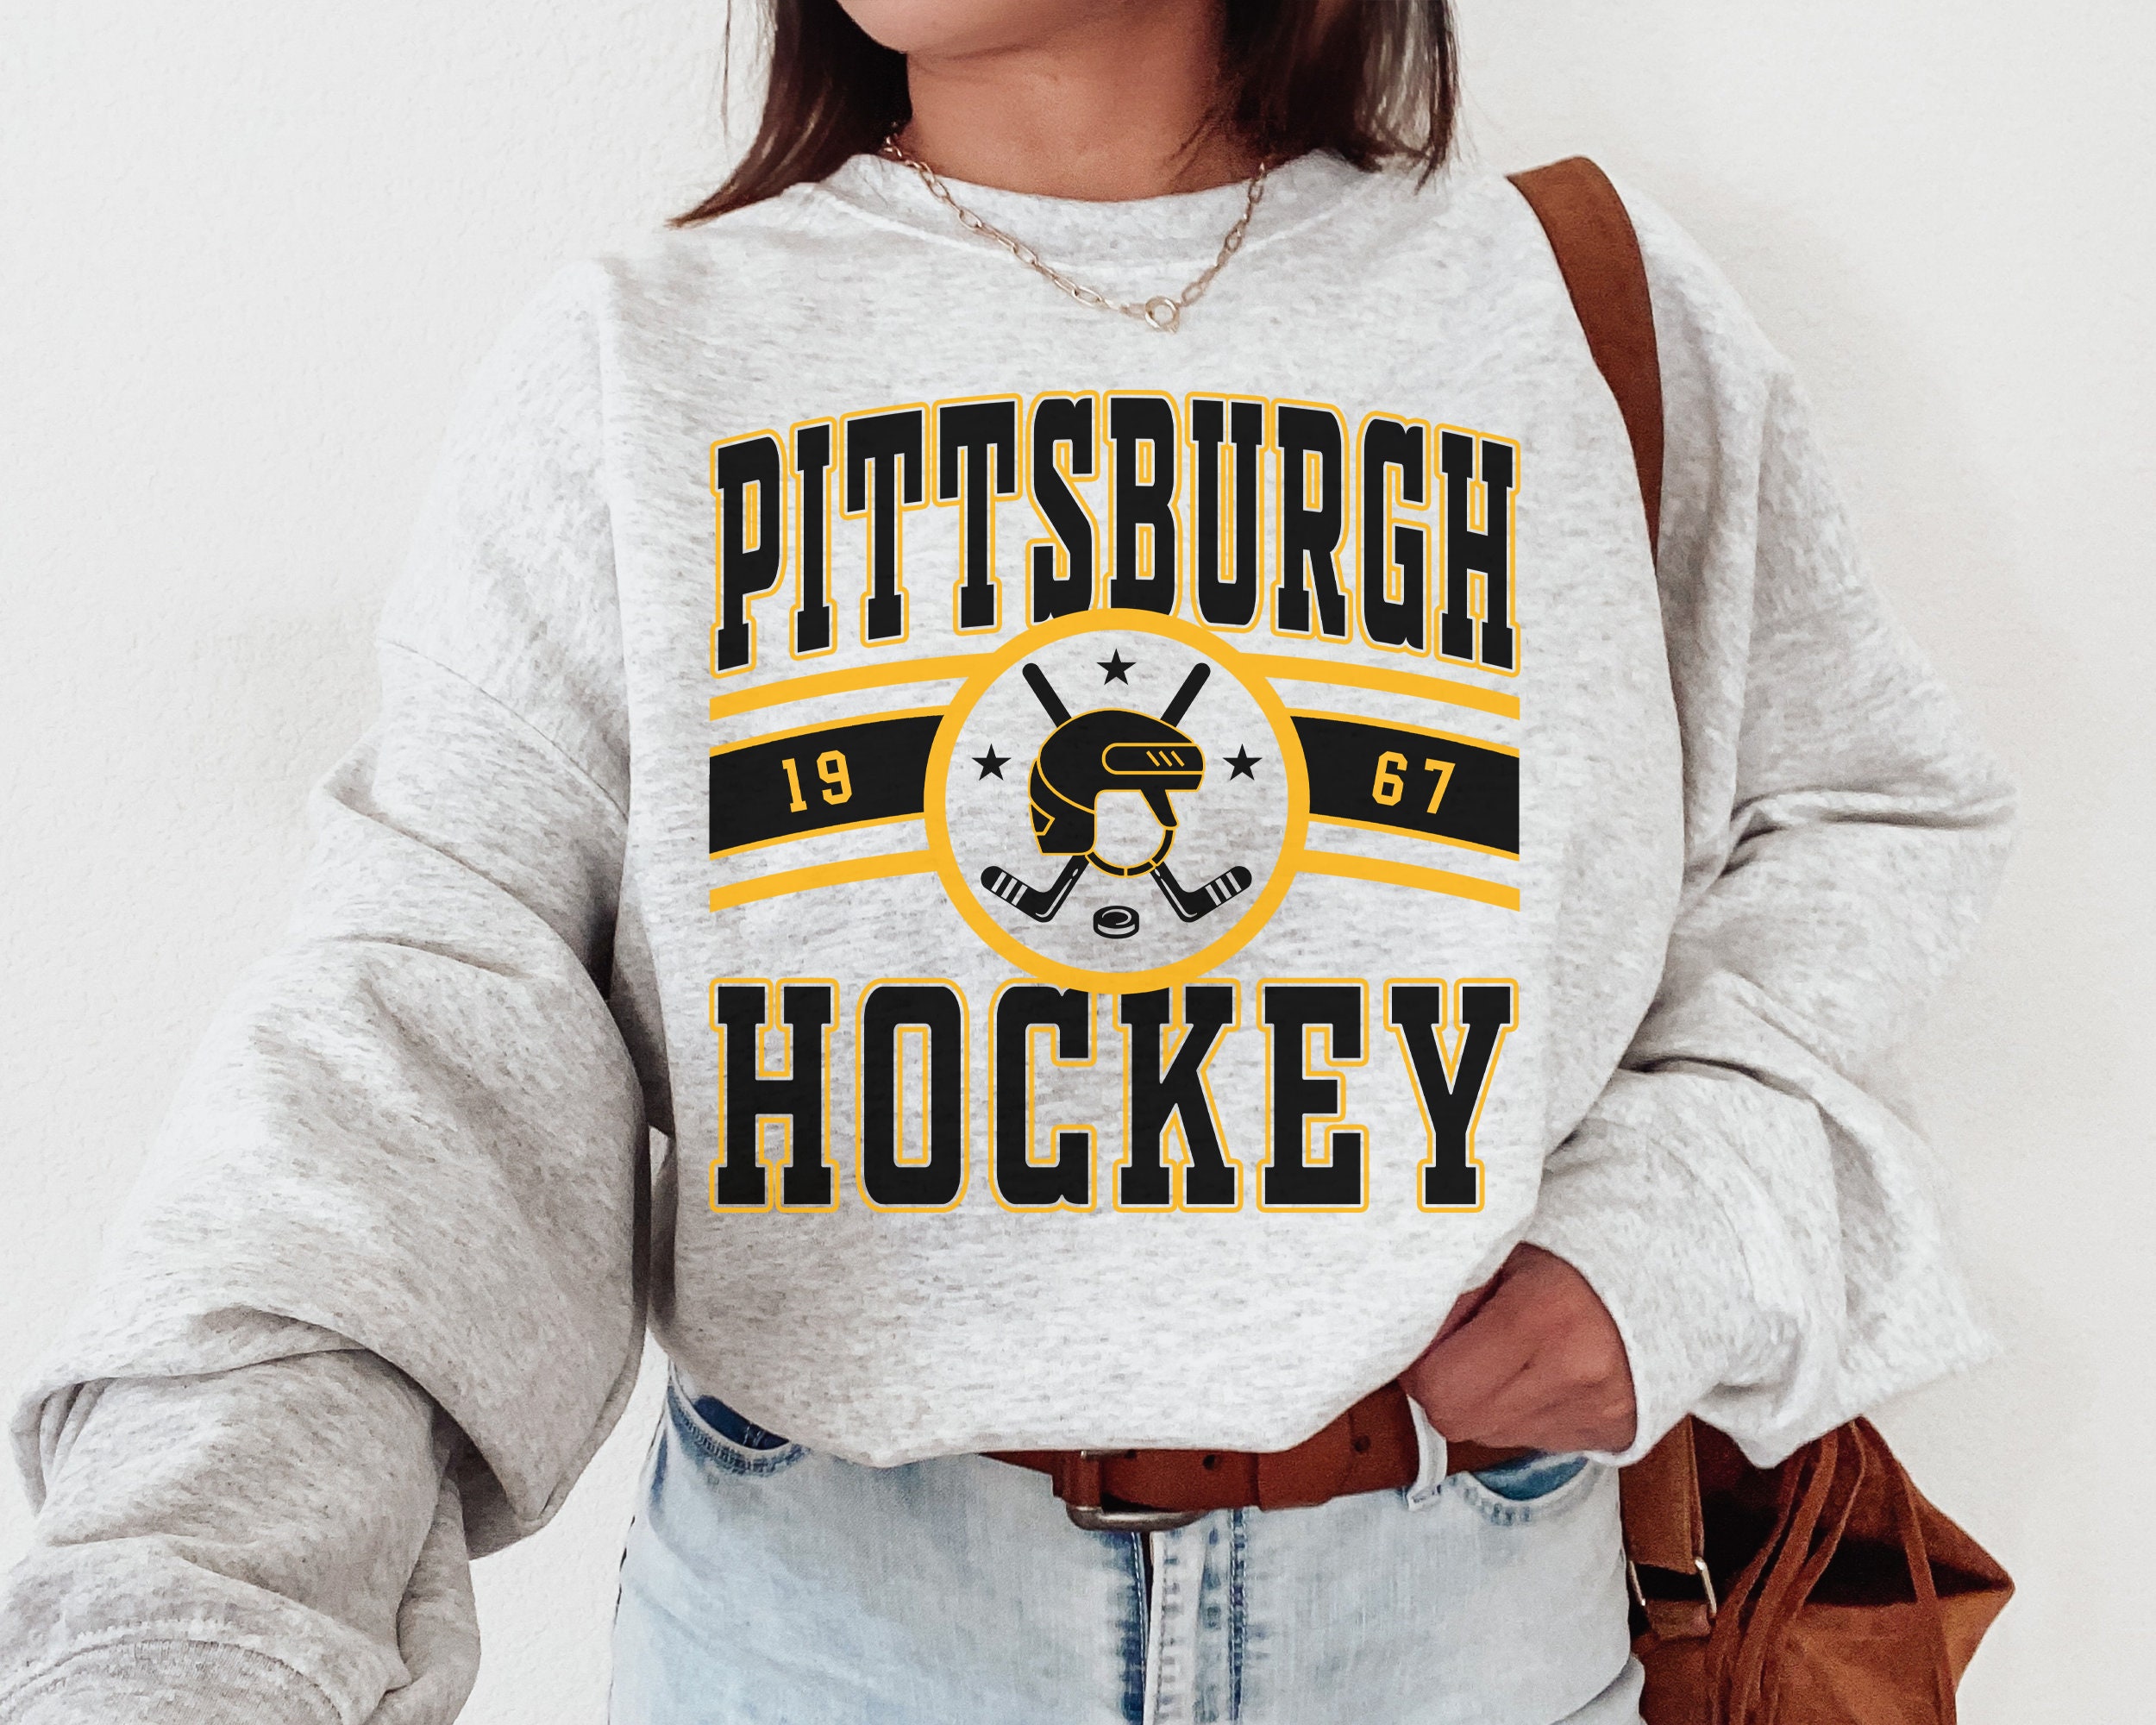 Buy Pittsburgh Penguins merchandise at the Pittsburgh Penguins Pro Shop and  team store